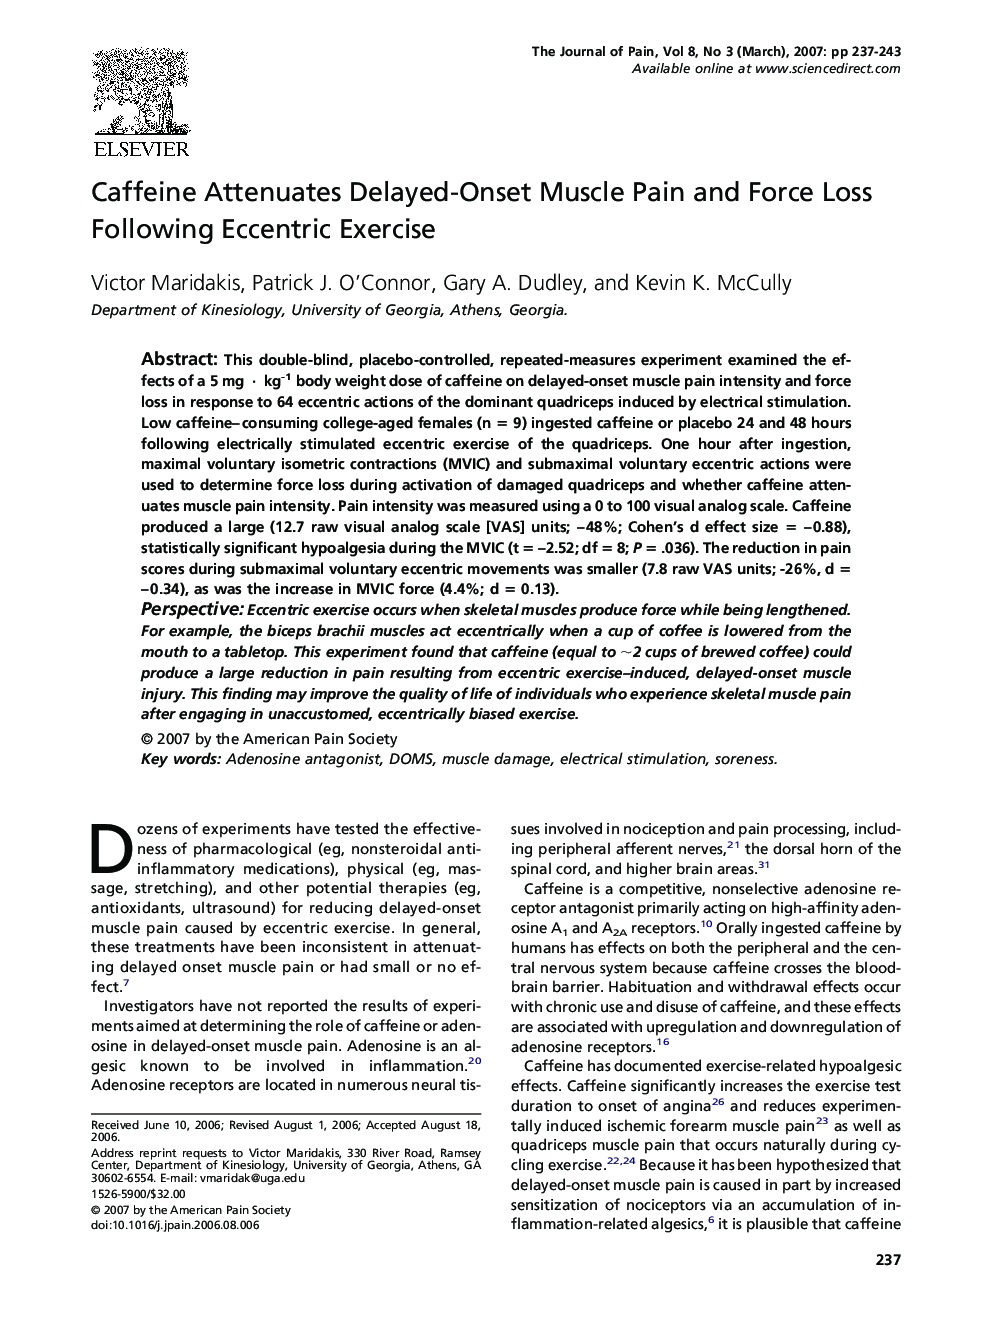 Caffeine Attenuates Delayed-Onset Muscle Pain and Force Loss Following Eccentric Exercise